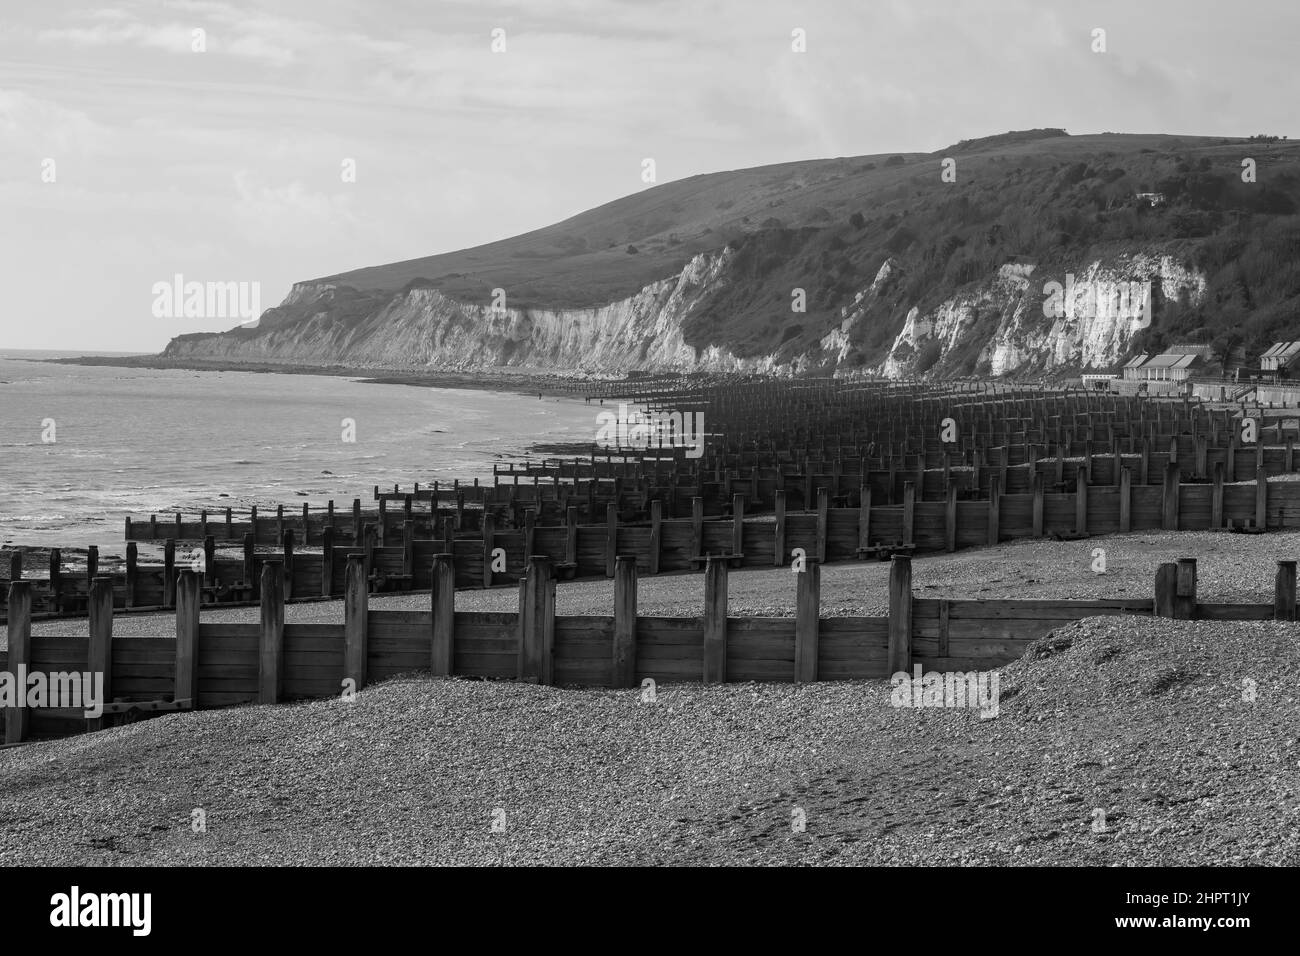 Eastbourne beach with rows of sea groynes, East Sussex, UK Stock Photo